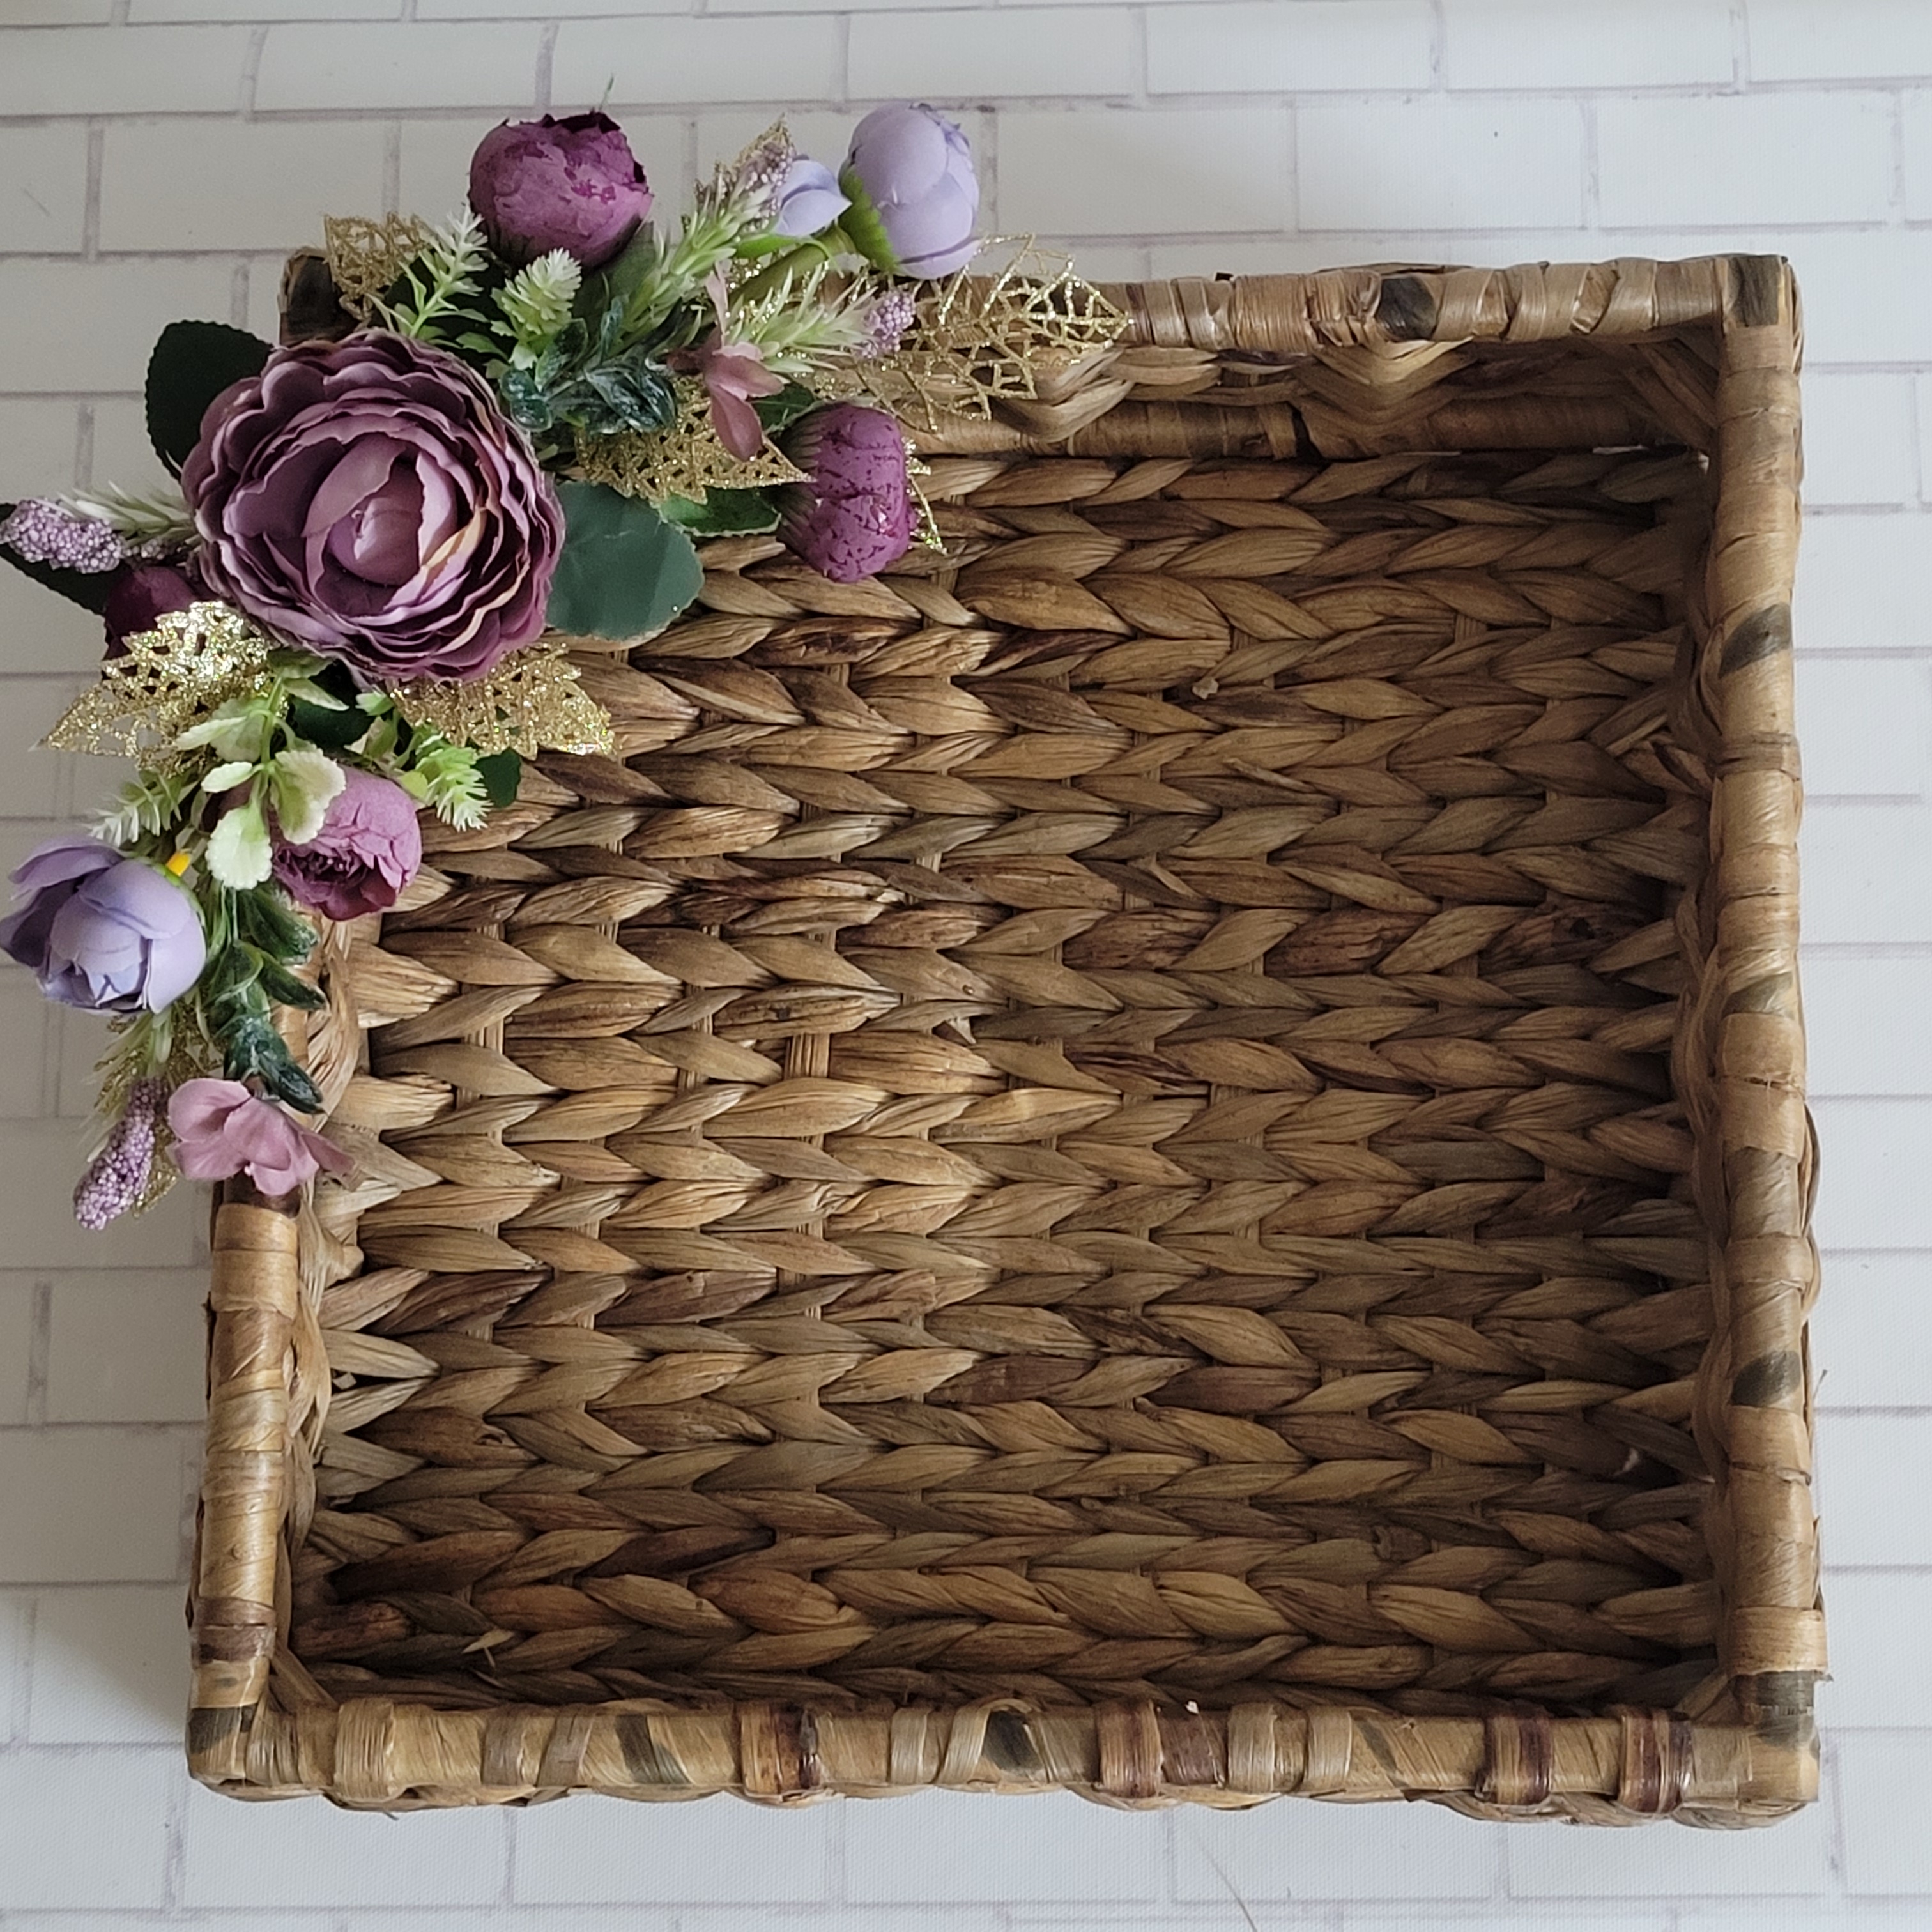 Floral Cane Square Tray 